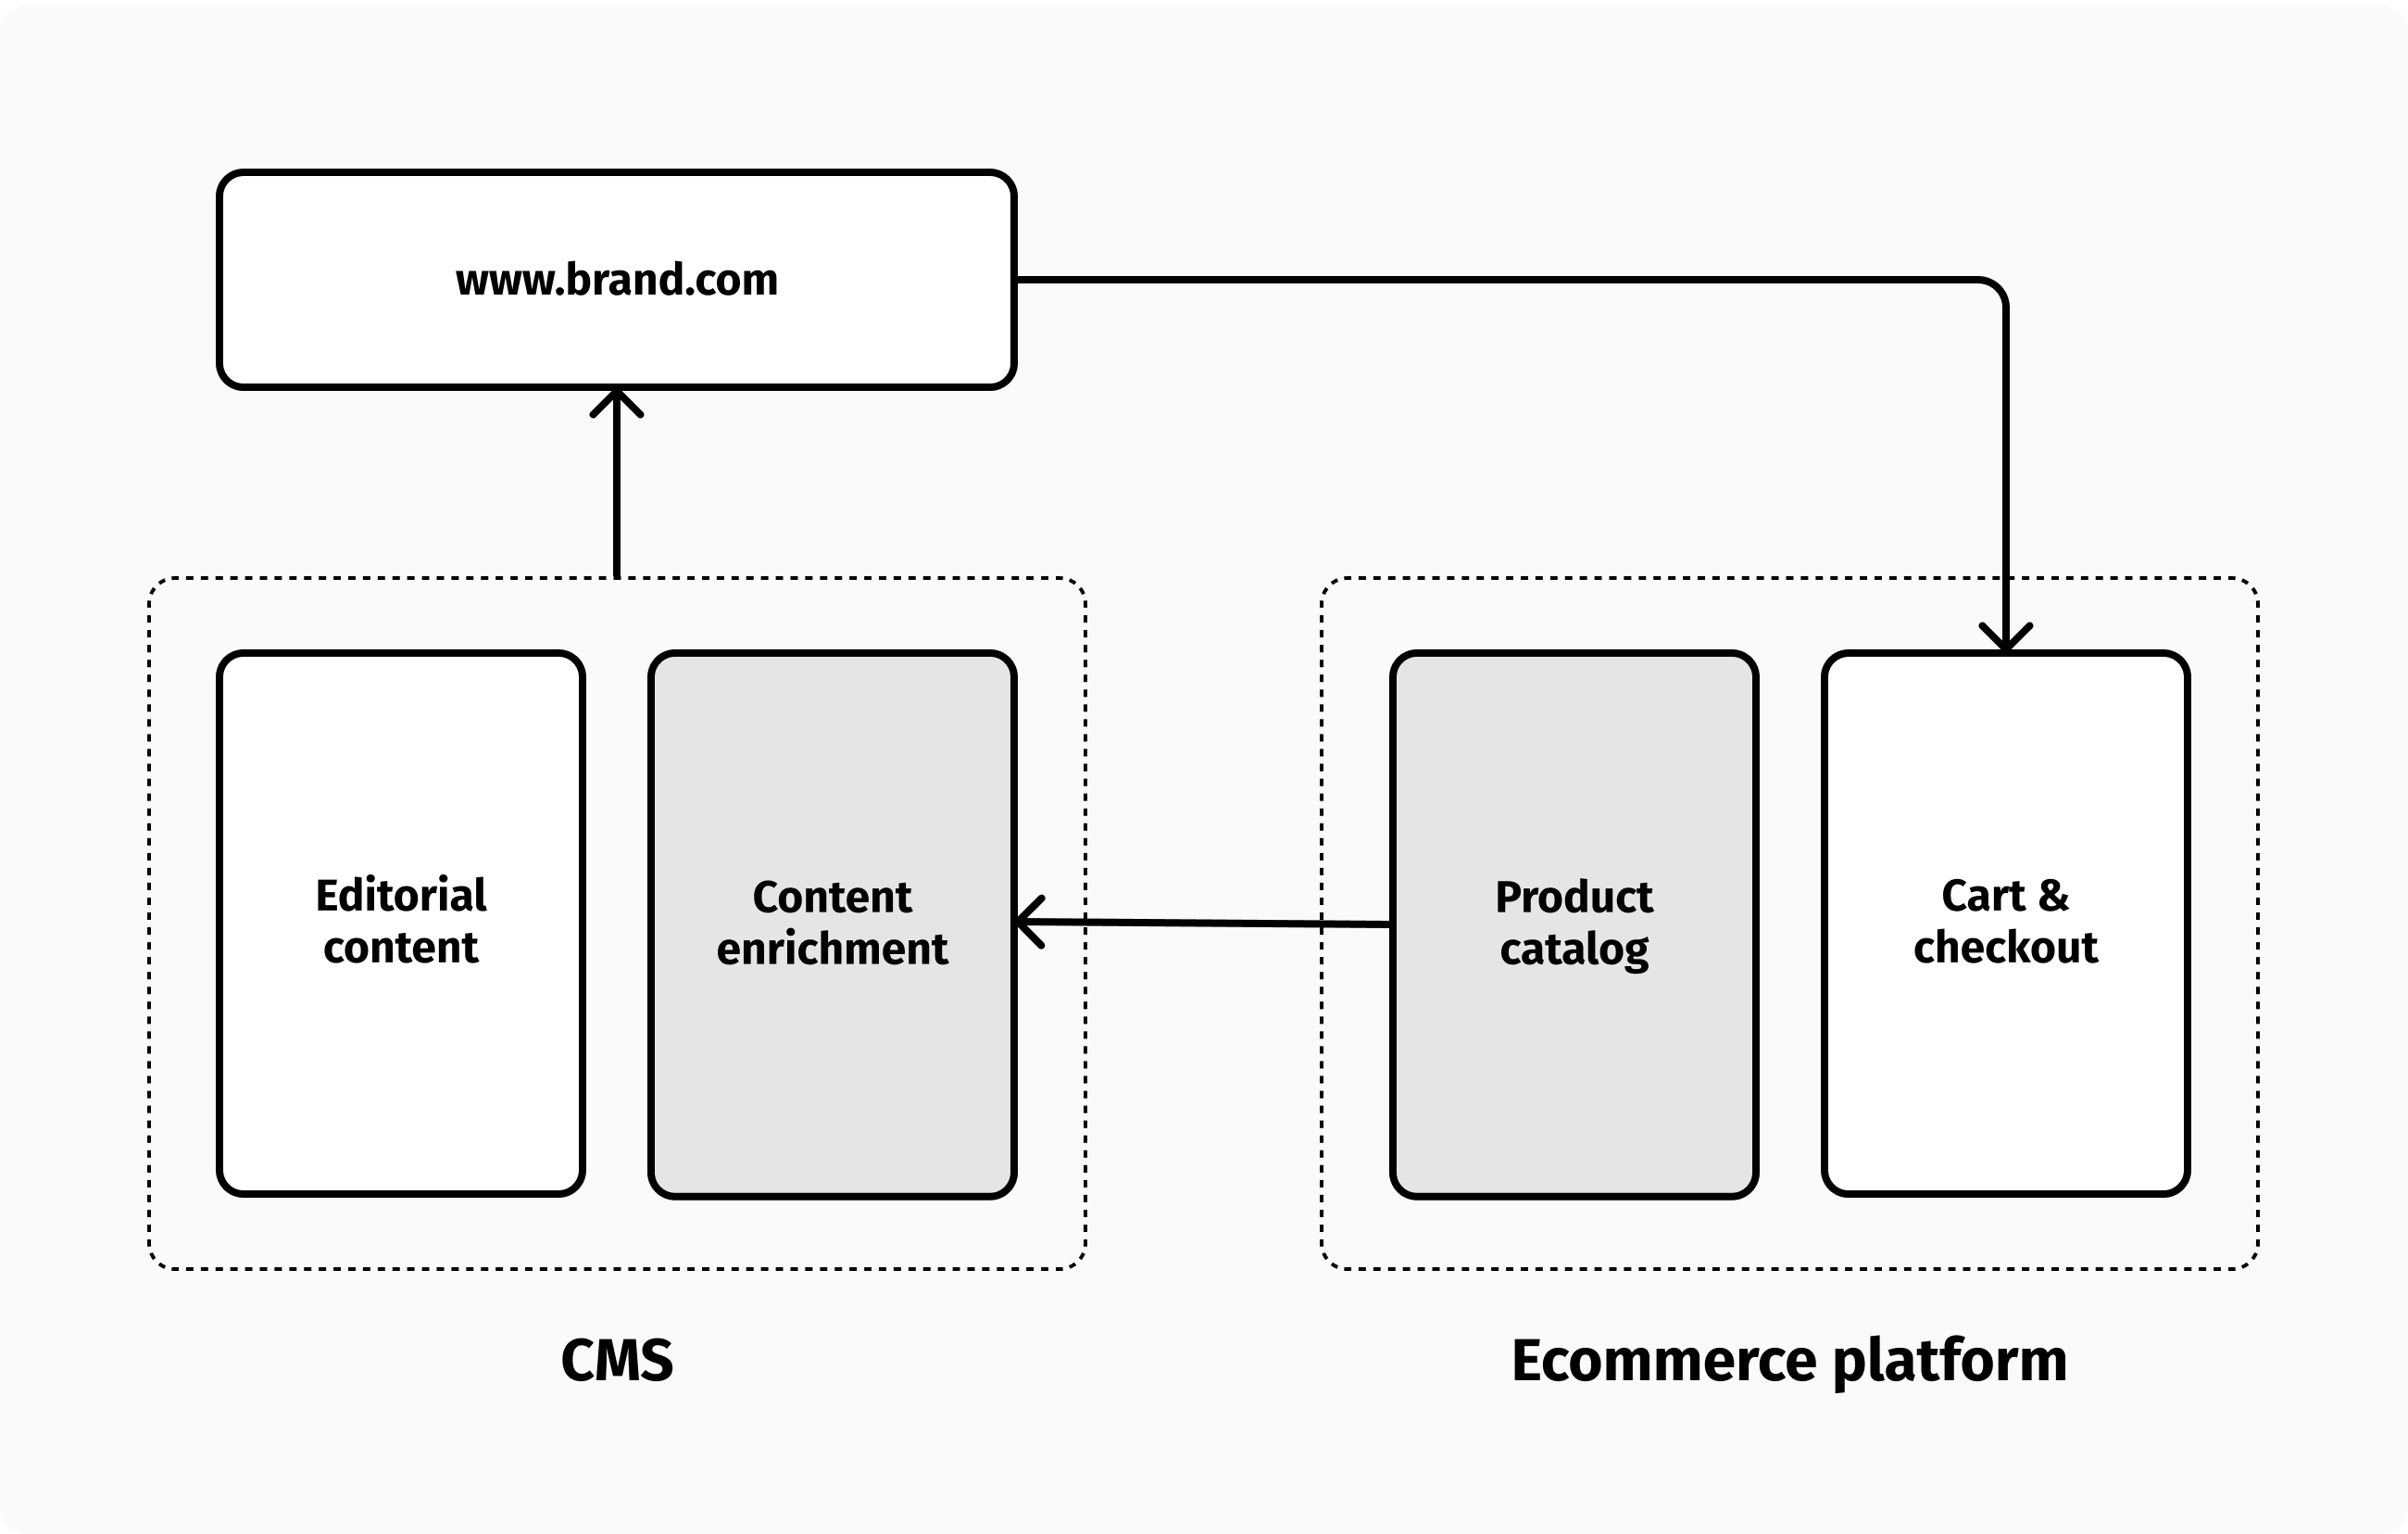 Product catalog is created with an ecommerce platform and enriched with a CMS.